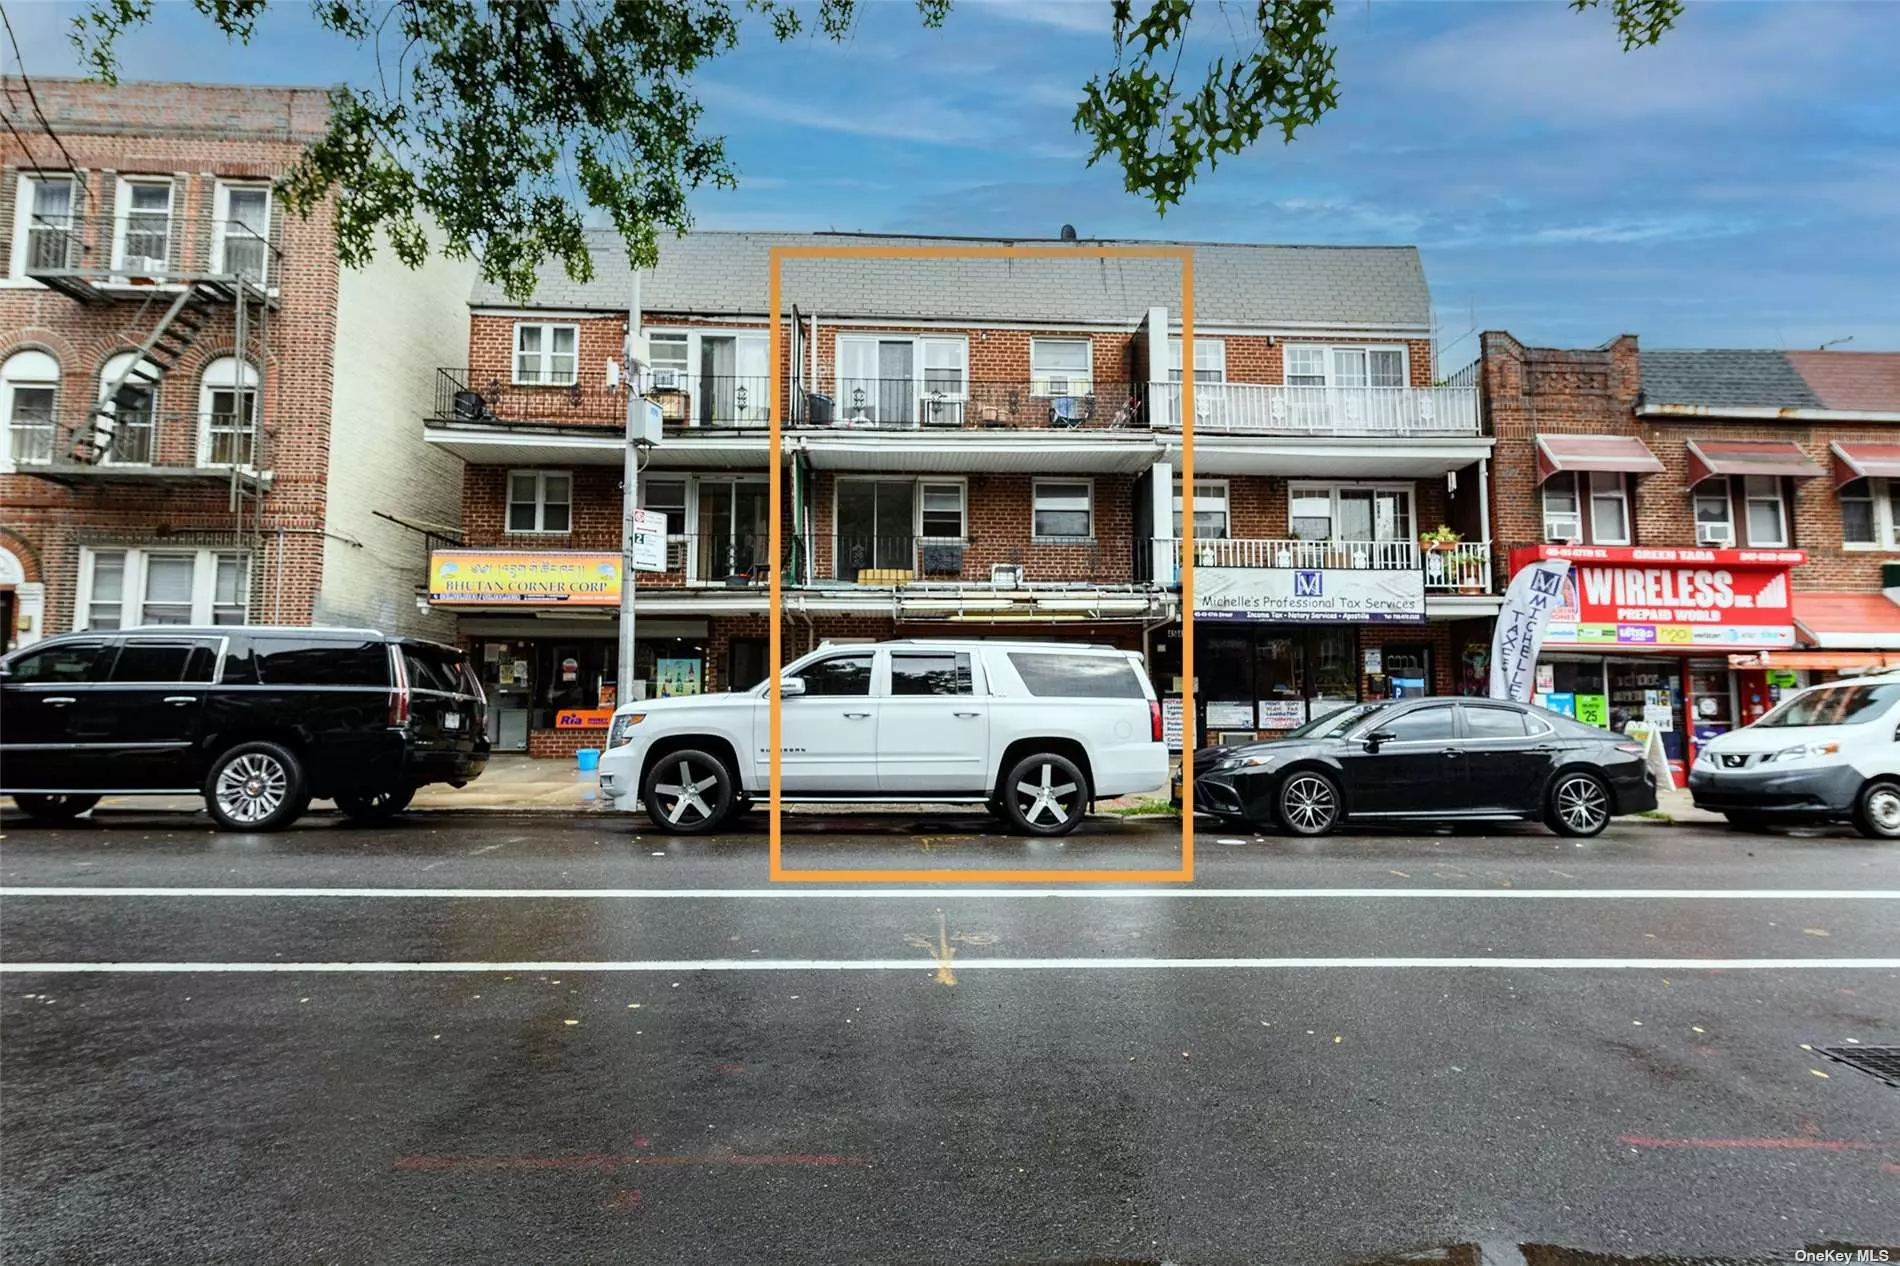 Retail / Office space (appx 450 sf), with additional storage space in basement, less than a block away from Greenpoint Ave & Queens Blvd. Tenant responsible for commission (12%)